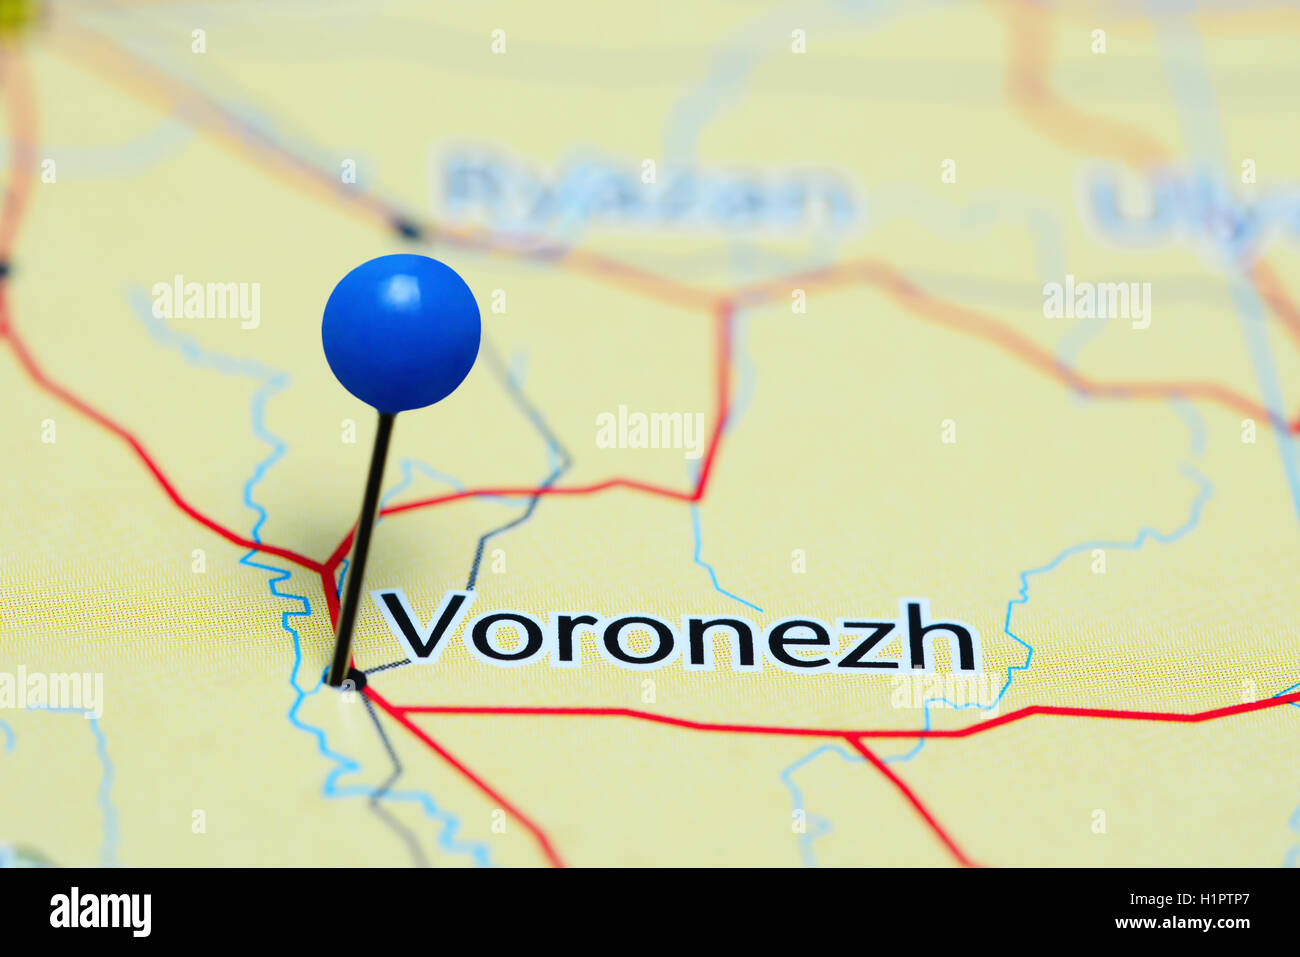 Voronezh pinned on a map of Russia Stock Photo